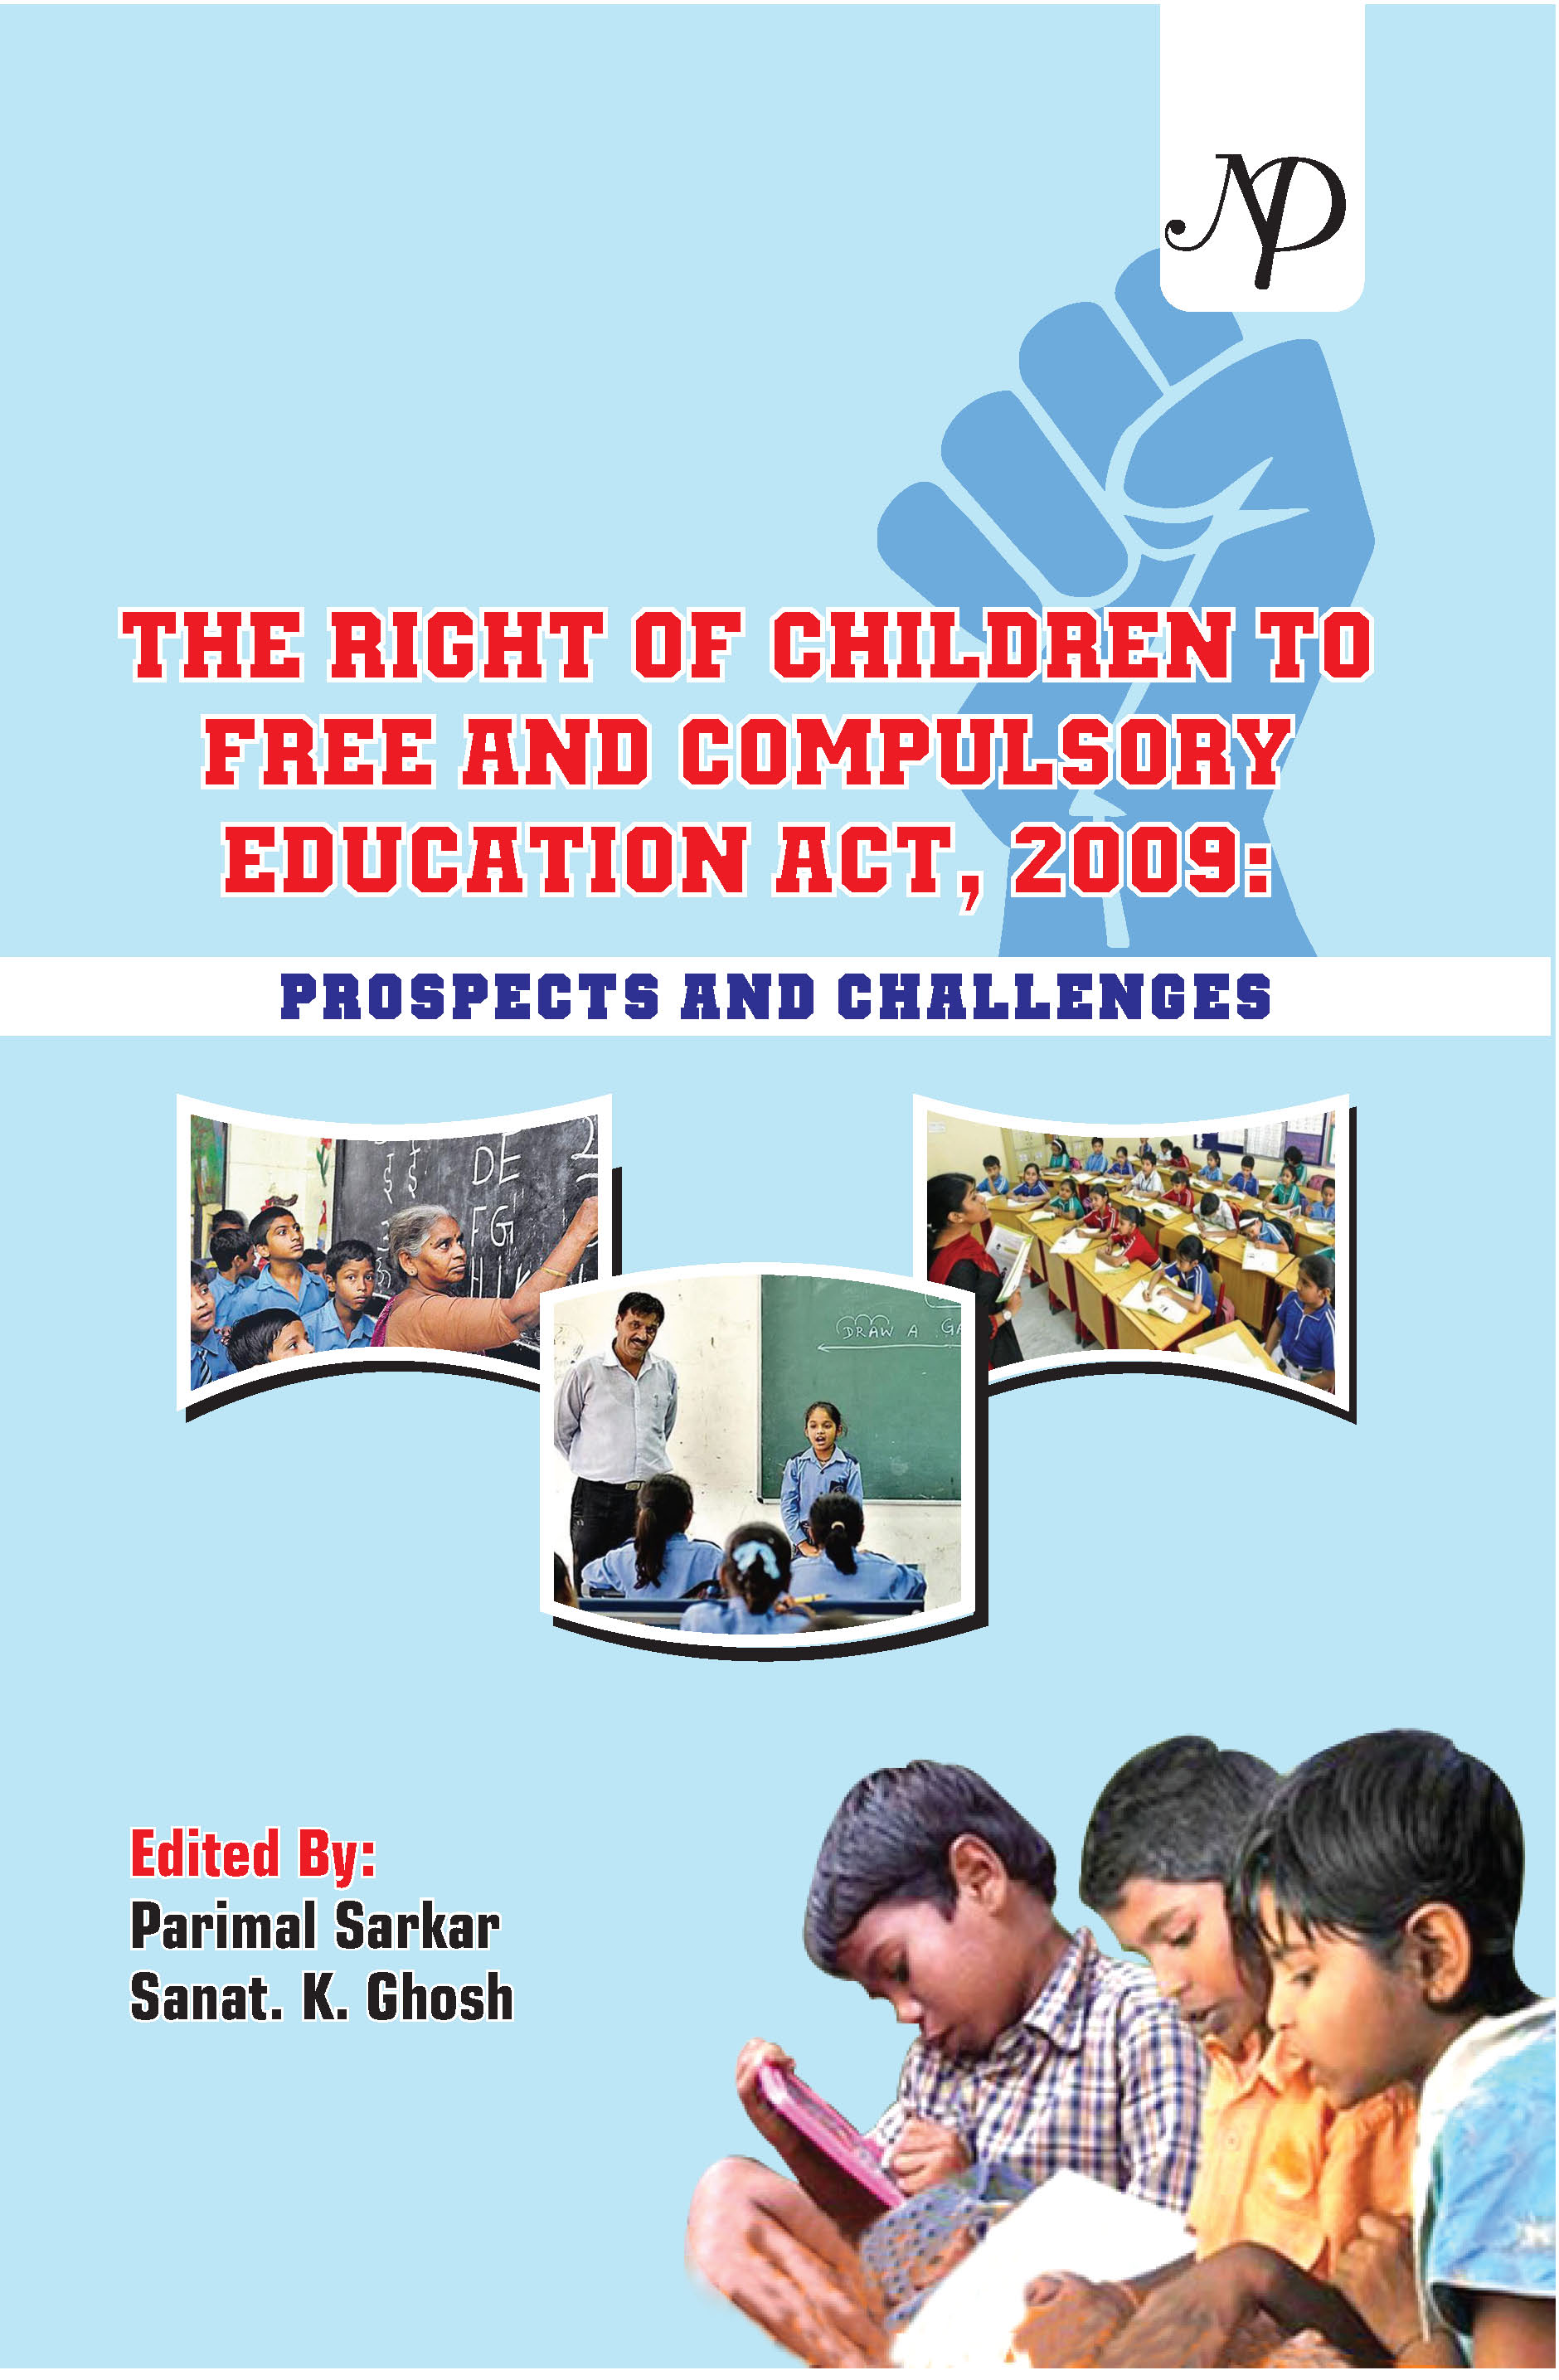 The Right of children to free and compulsory education Cover.jpg